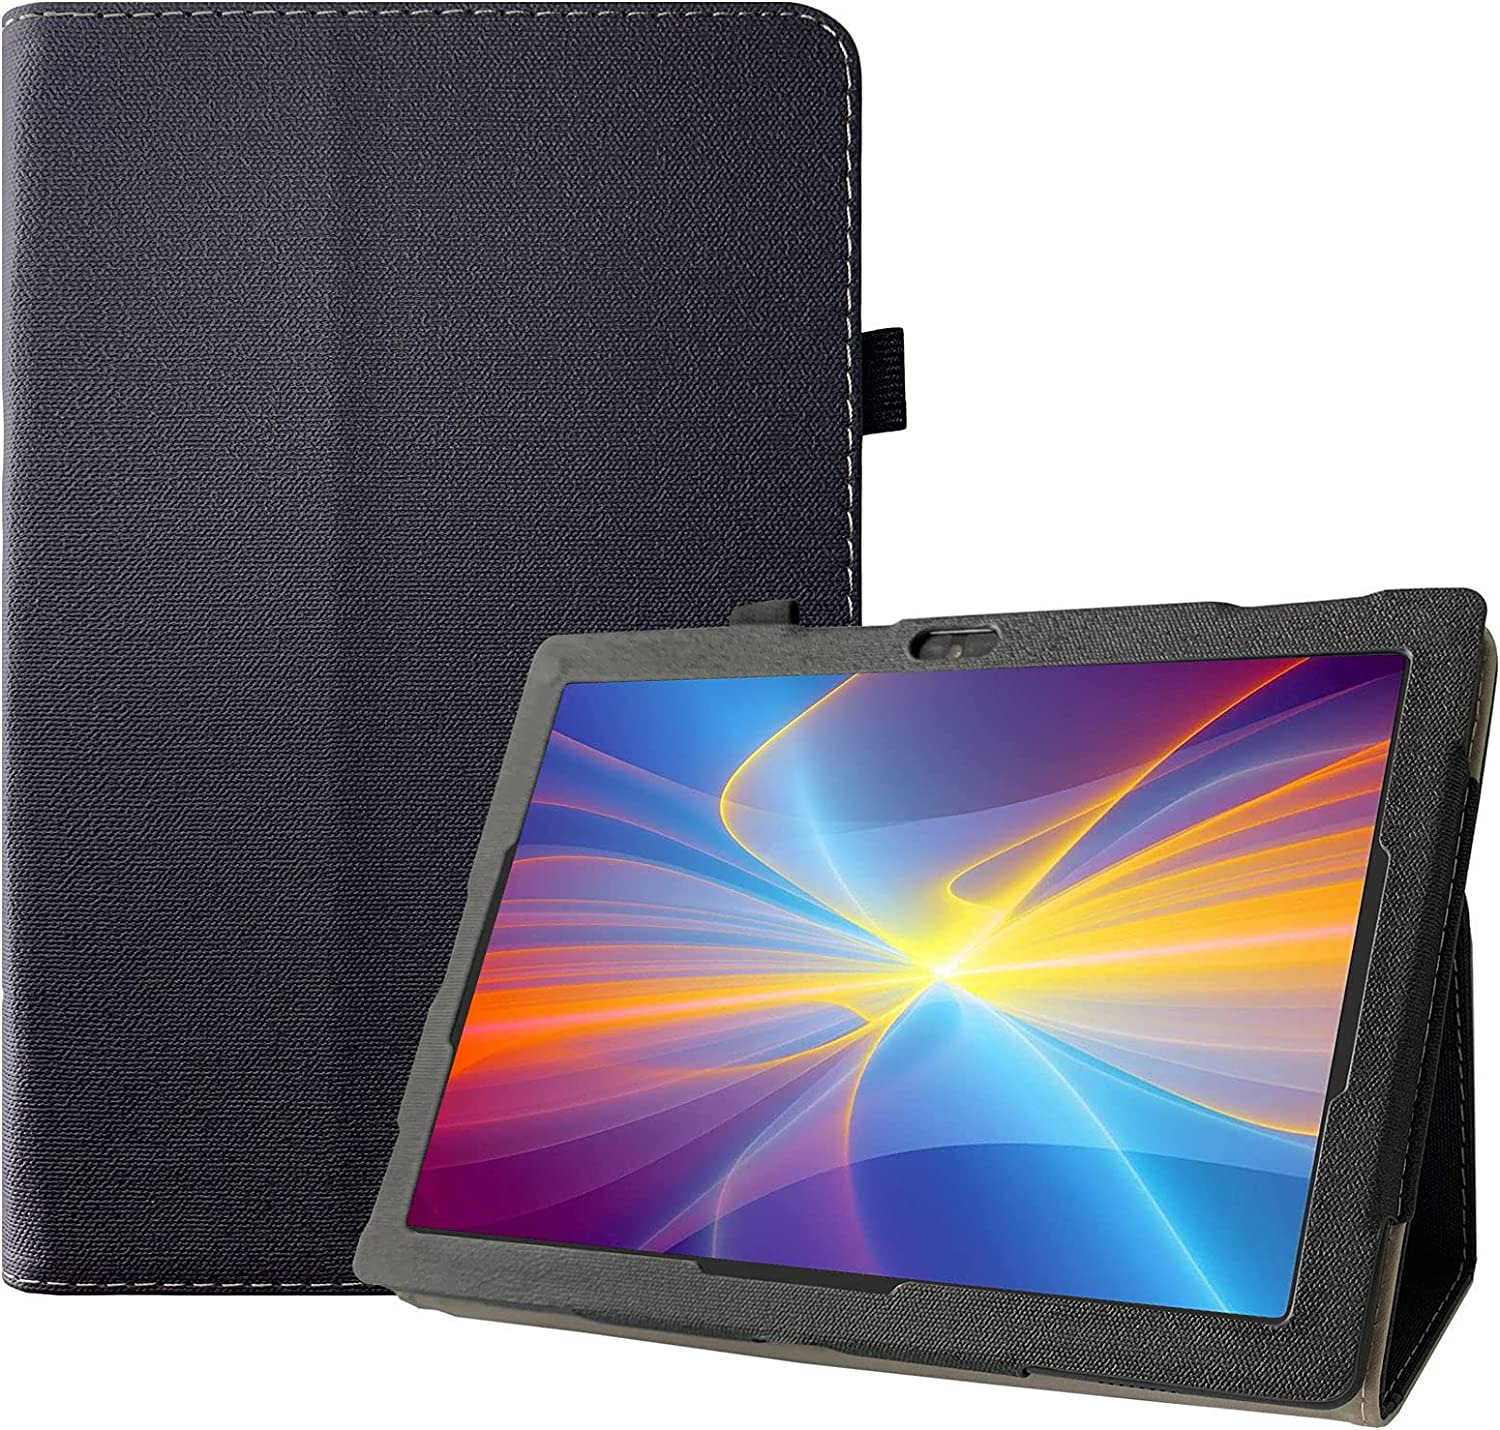 Case for Moderness Tablet 10.1/ Smart Life Within Reach Tablet 10.1 MB1001 Cases